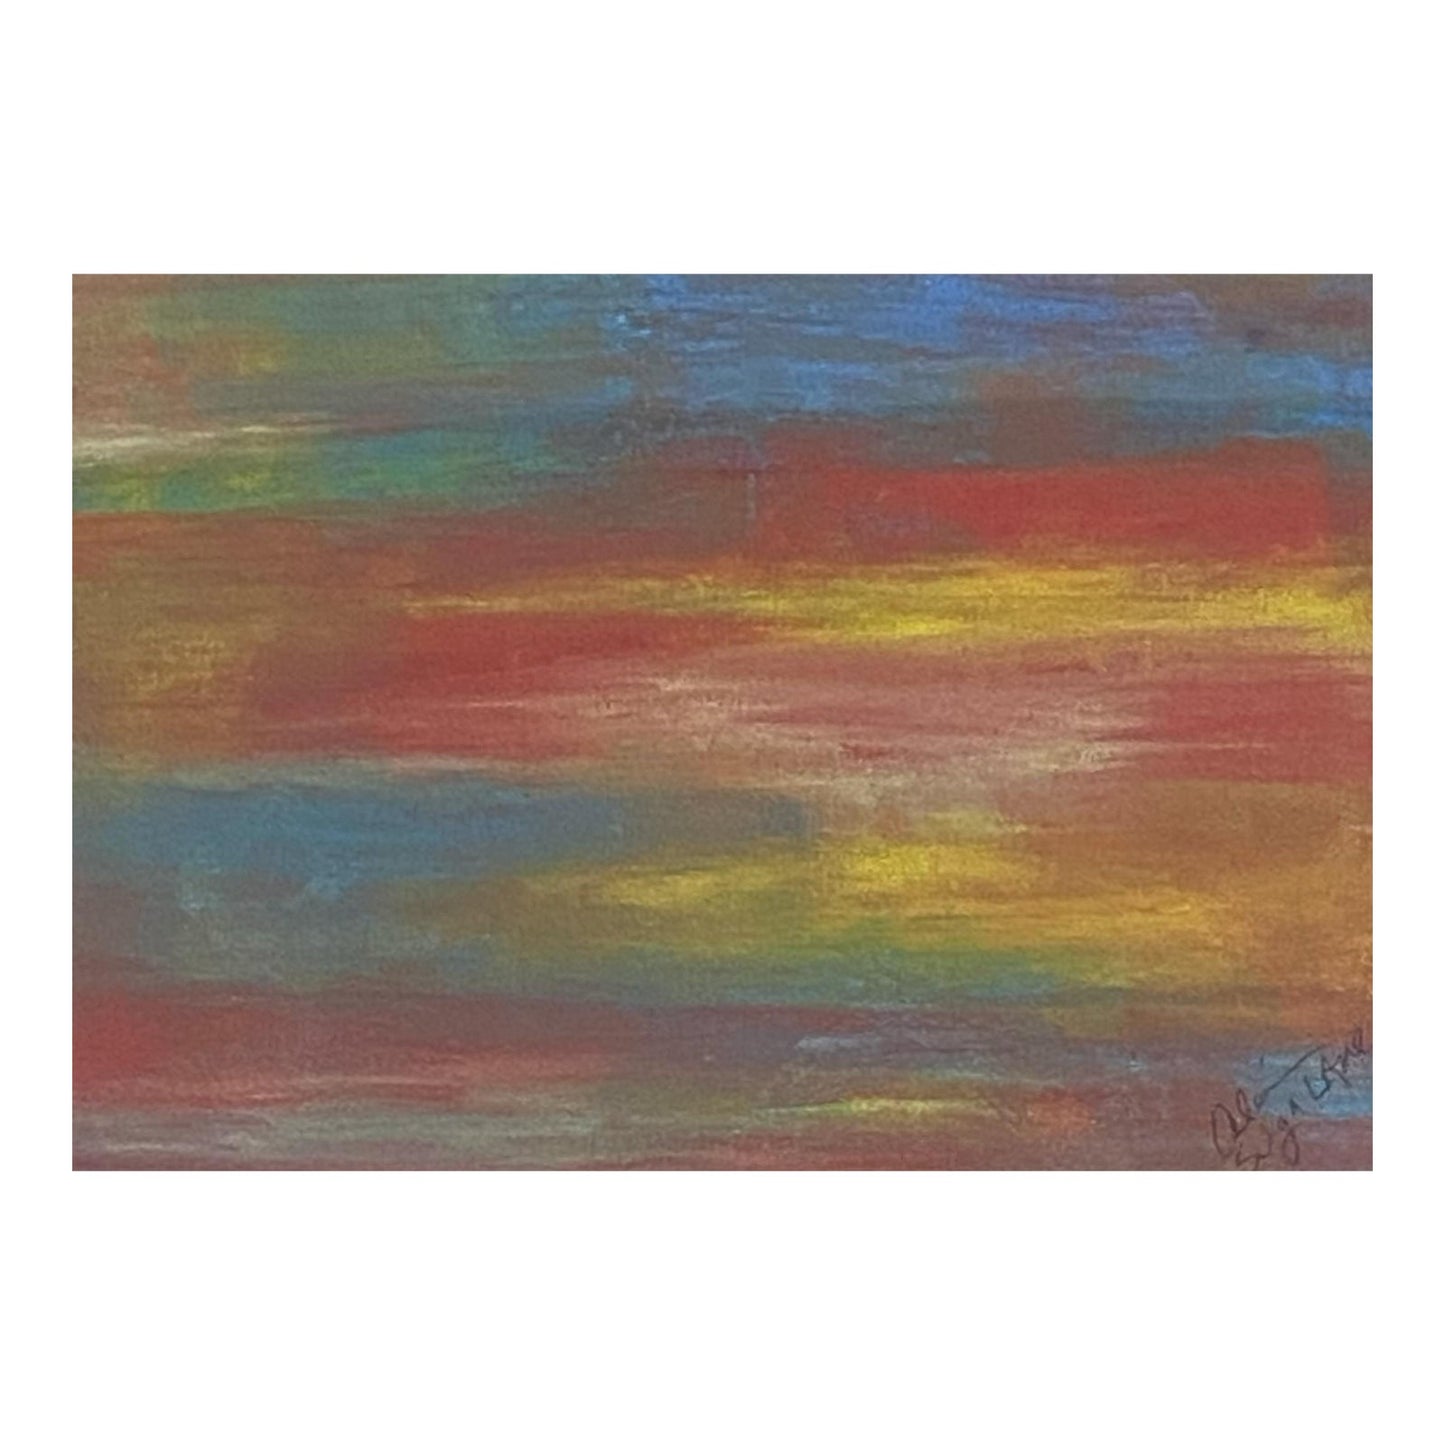 Original Abstract Acrylic Painting by Suga Lane From Soothing Trio Collection ABBY ESSIE STUDIOS